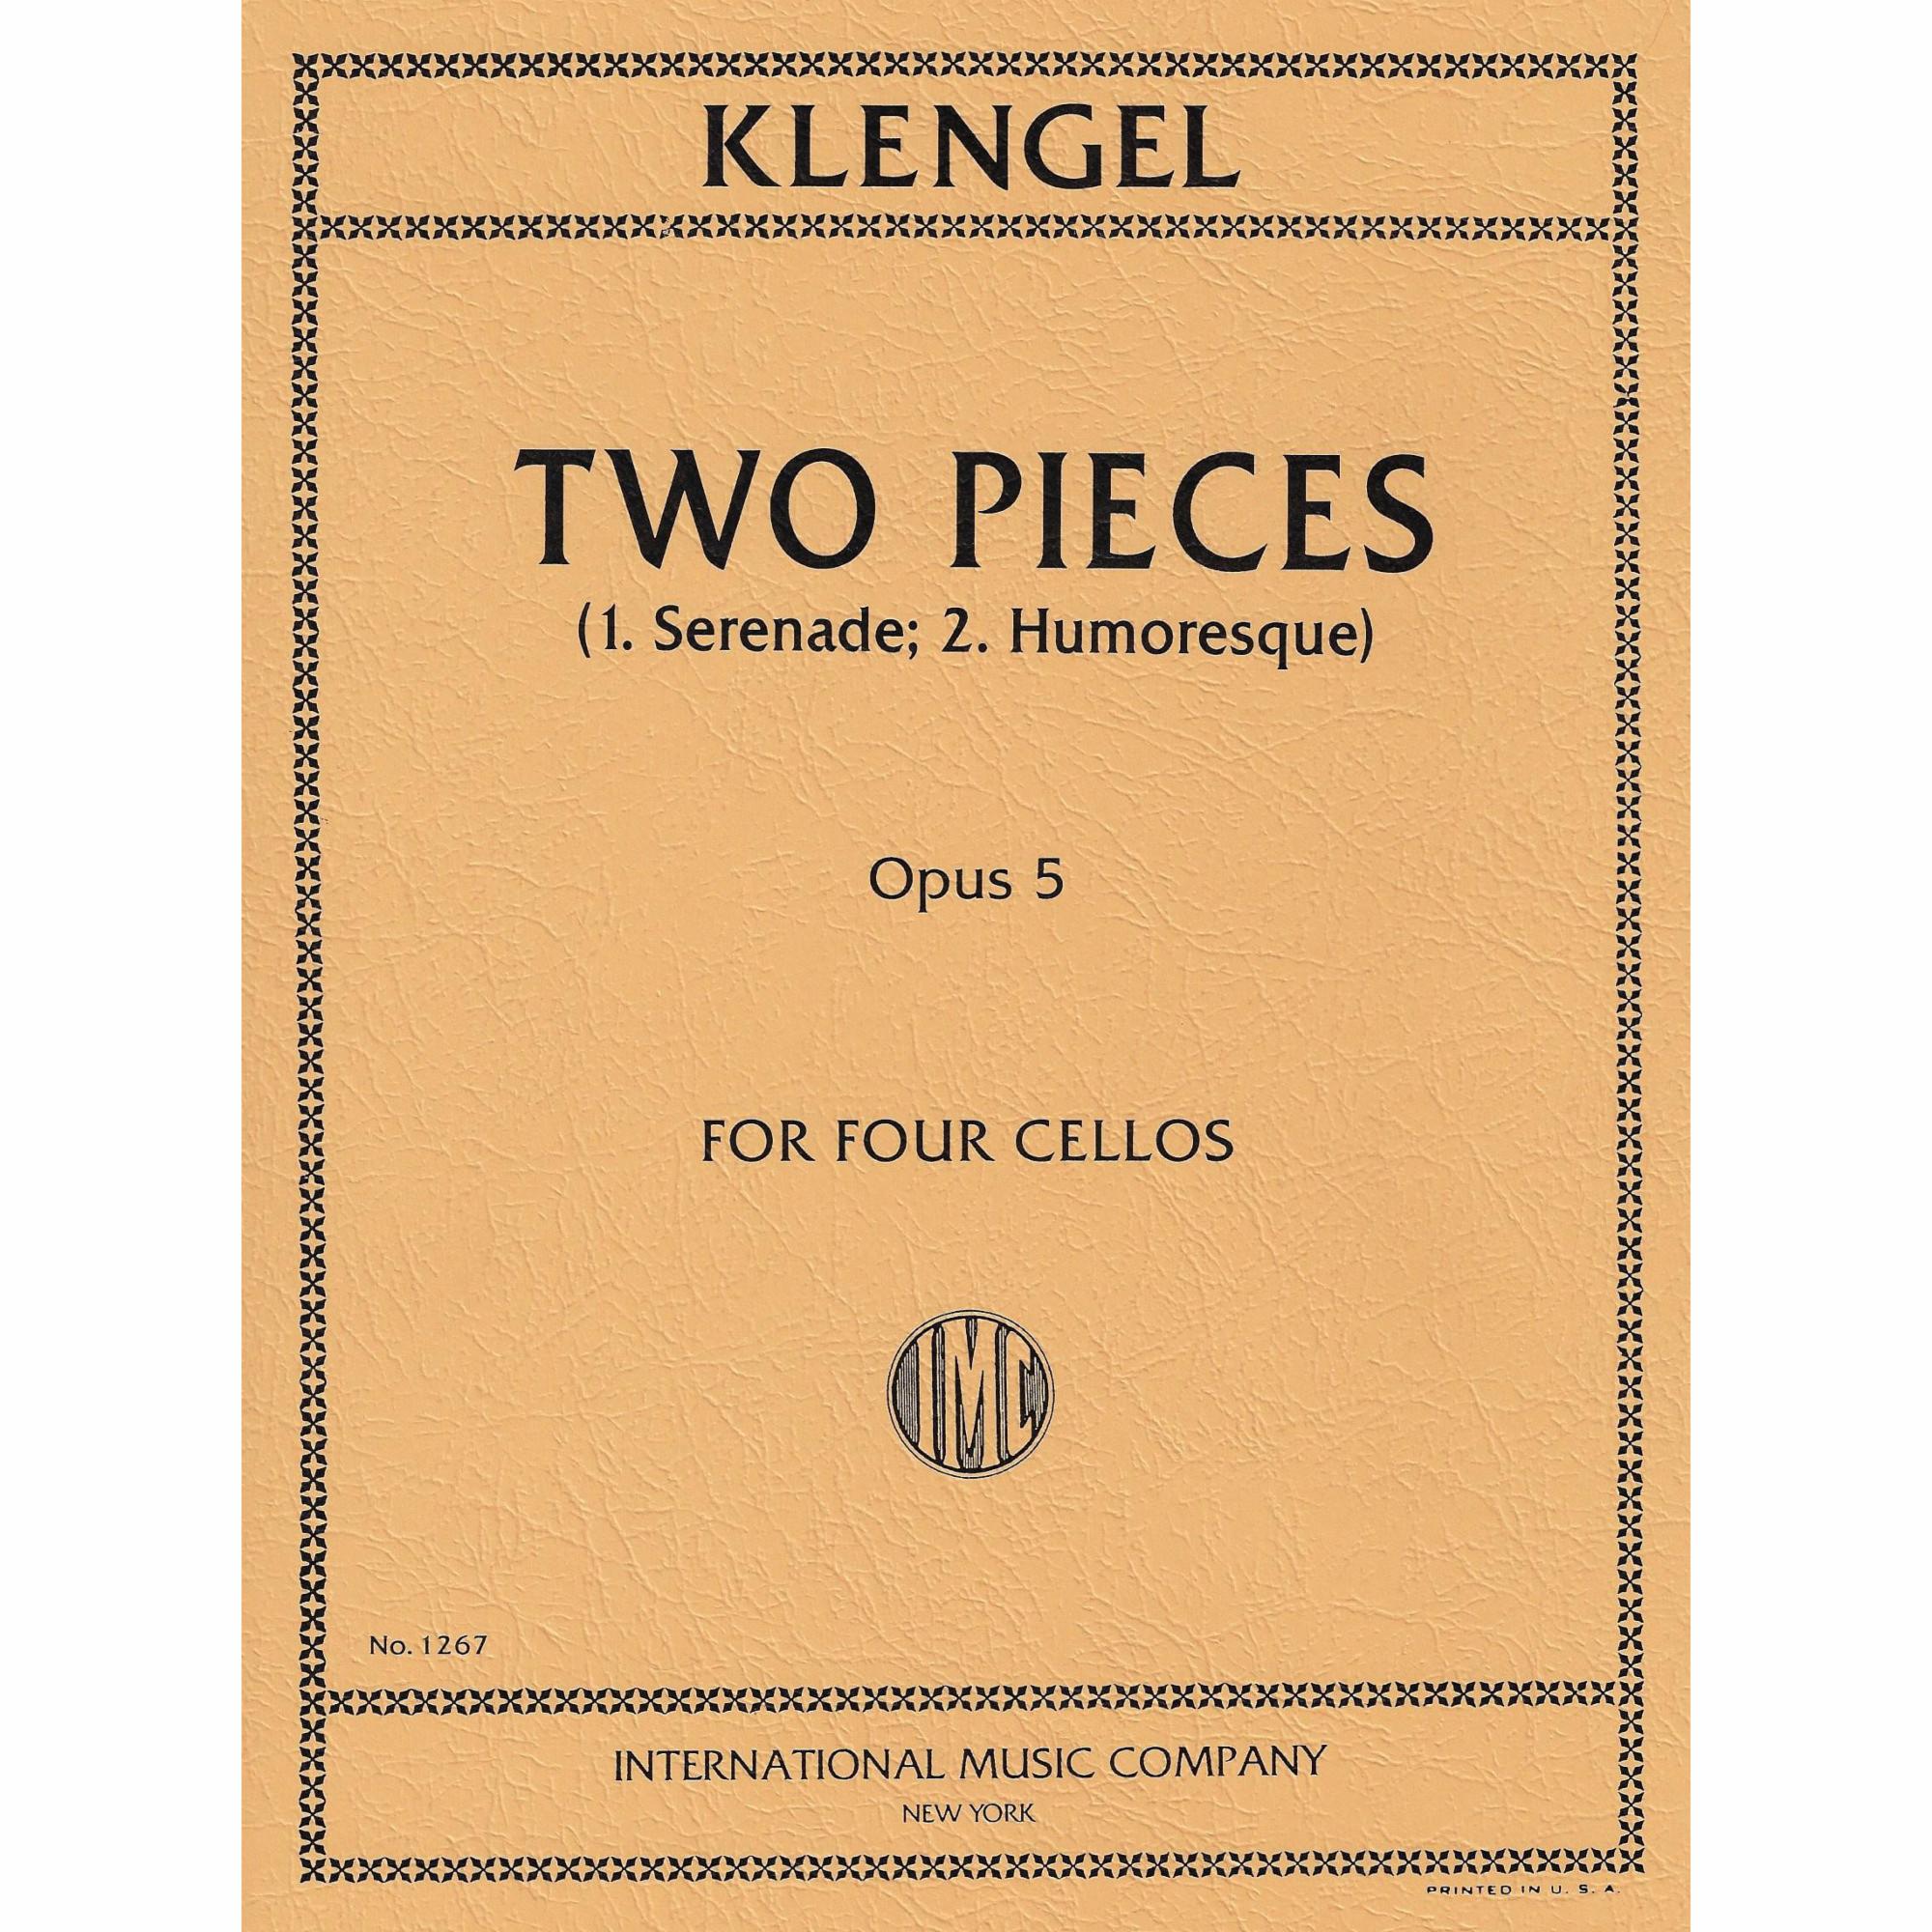 Klengel -- Two Pieces, Op. 5 for Four Cellos